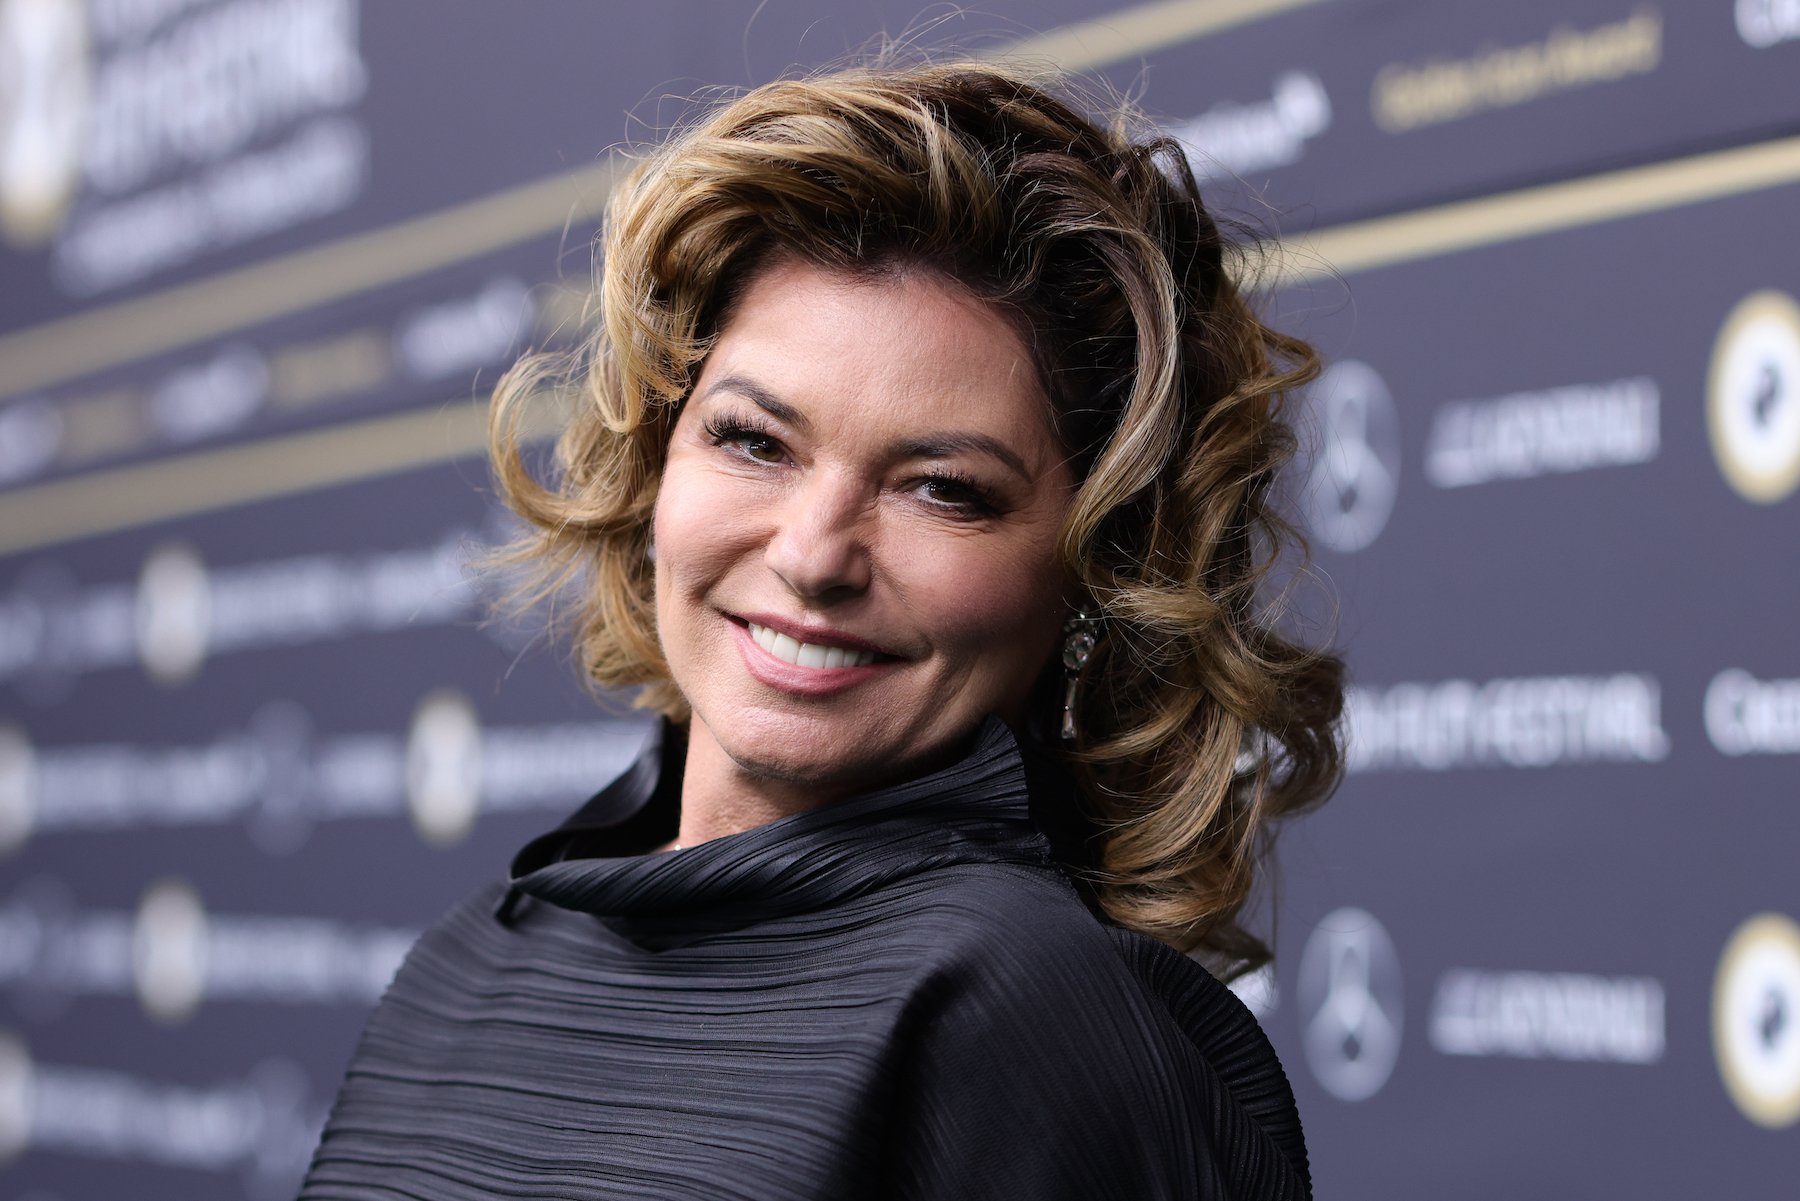 Shania Twain, who has a son named Eja, wearing black and smiling for a photo